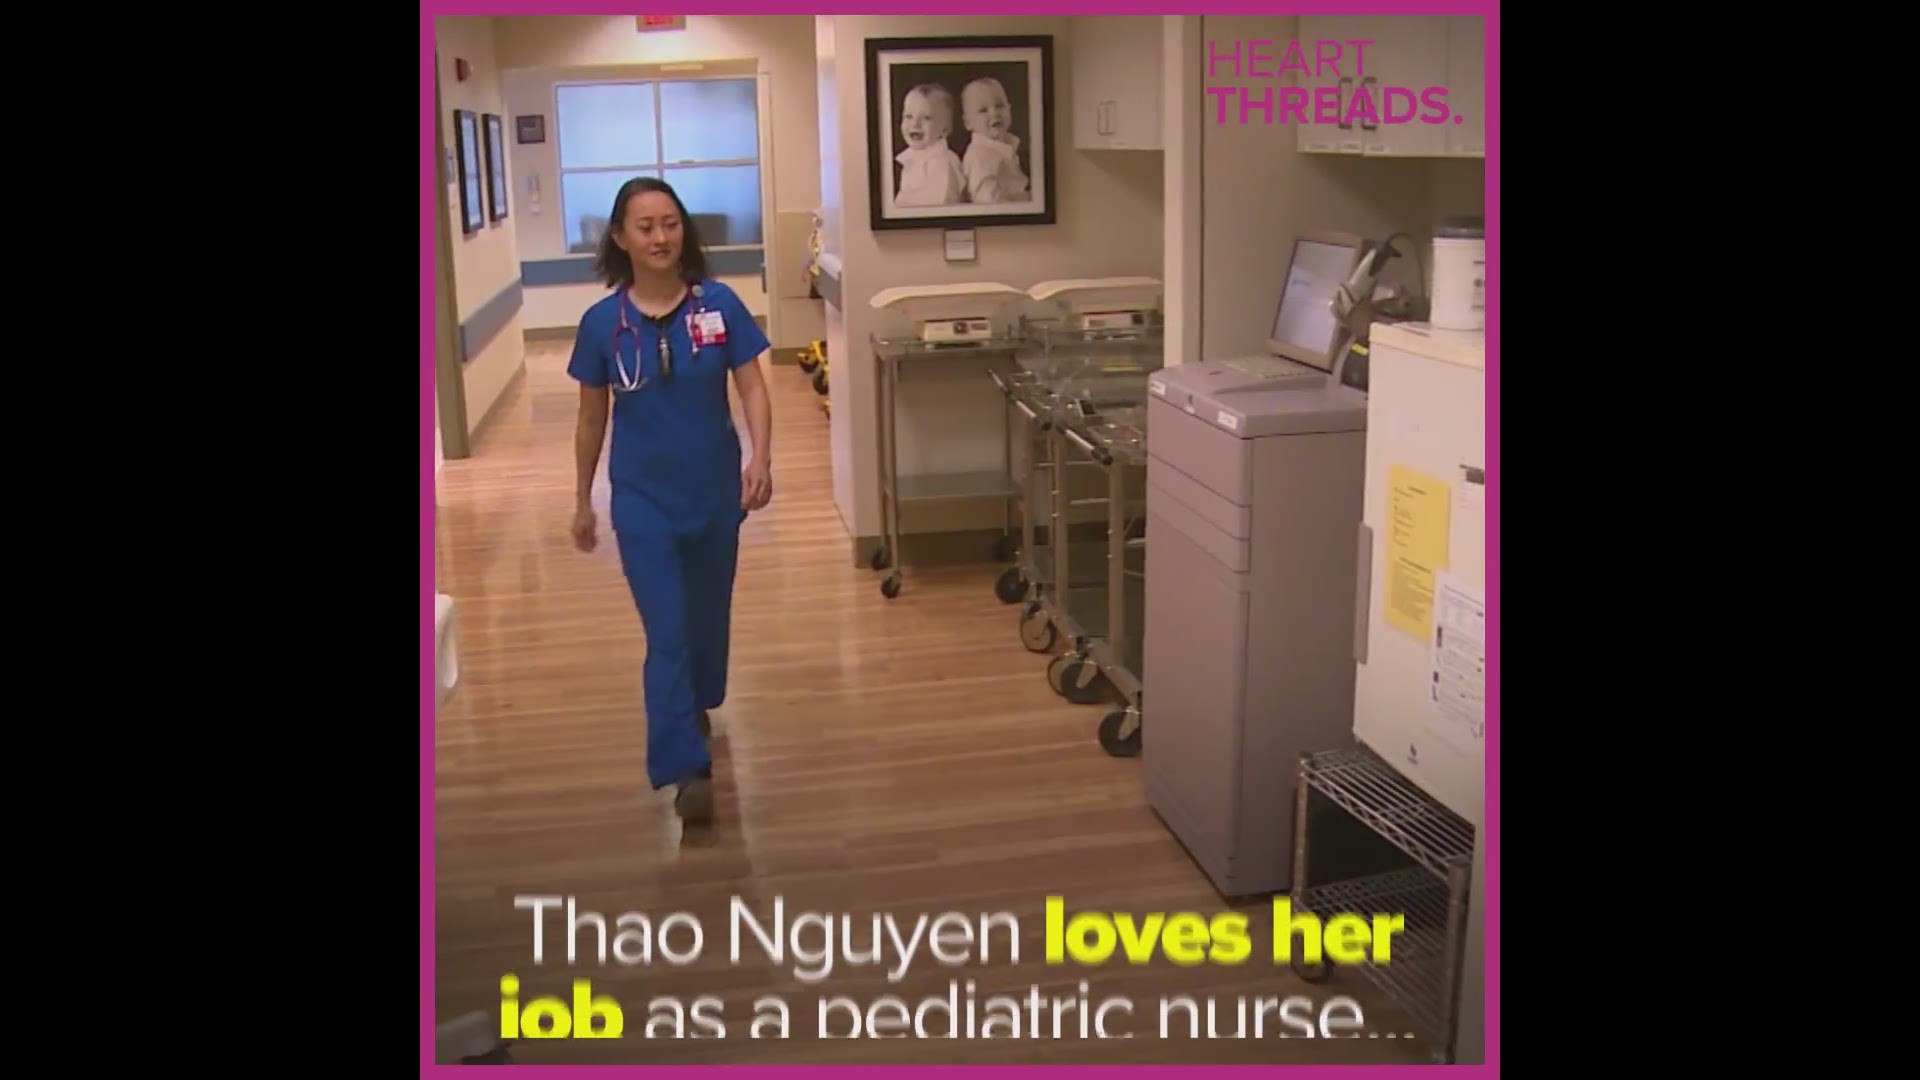 Thao Nguyen came to the US at just 17 months old as a refugee. Her mother became a nurse to give back to the country that welcomed them. Now Thao is following in her footsteps.